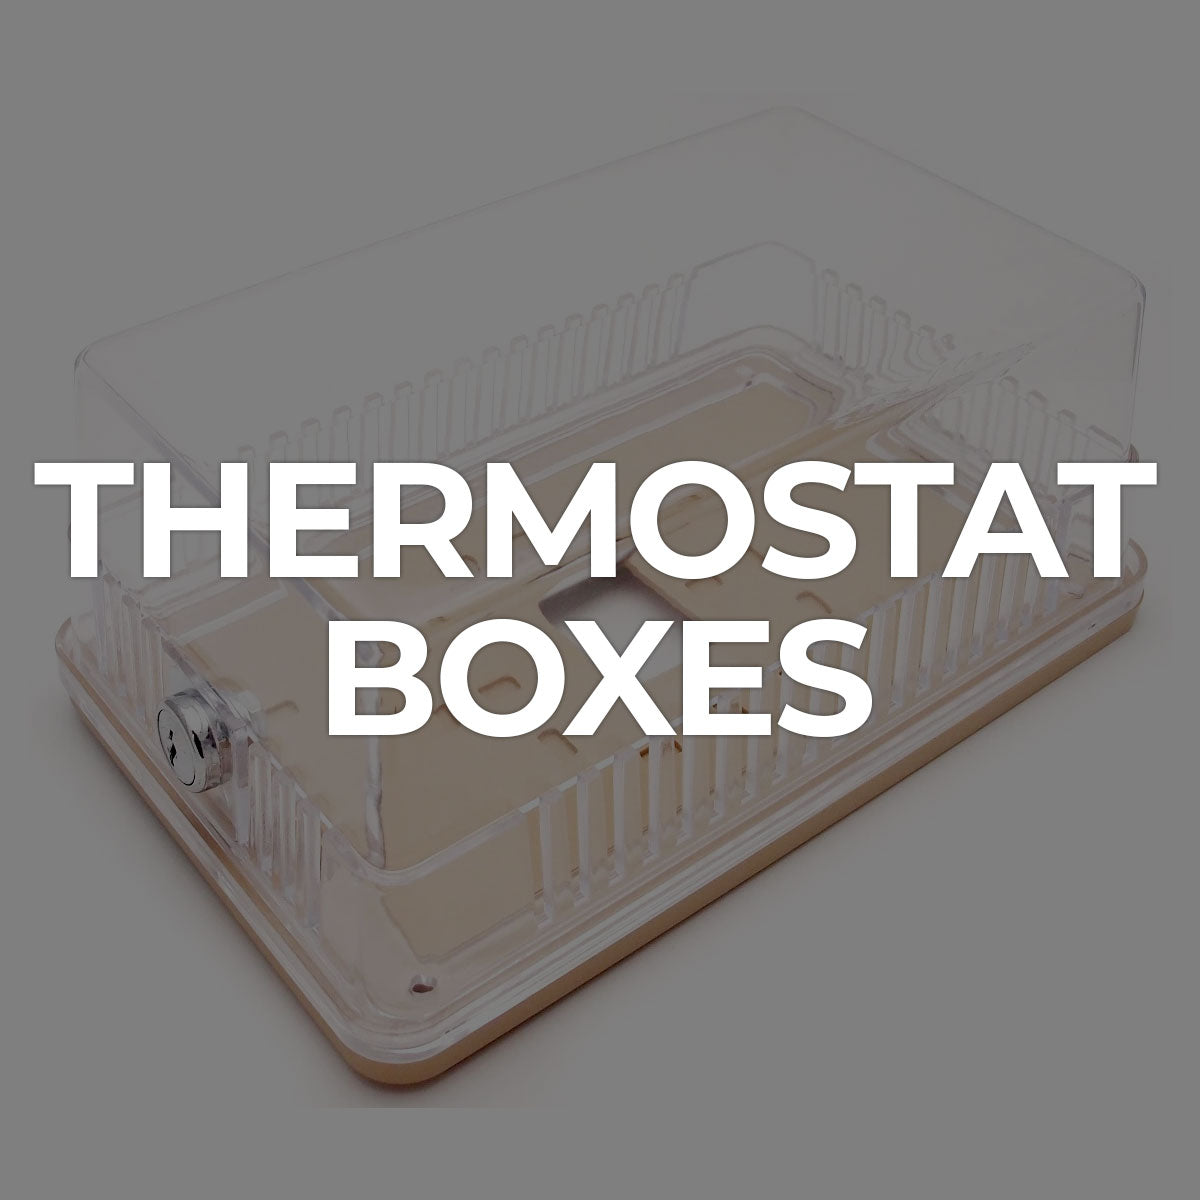 Search by Collections: Thermostat Boxes